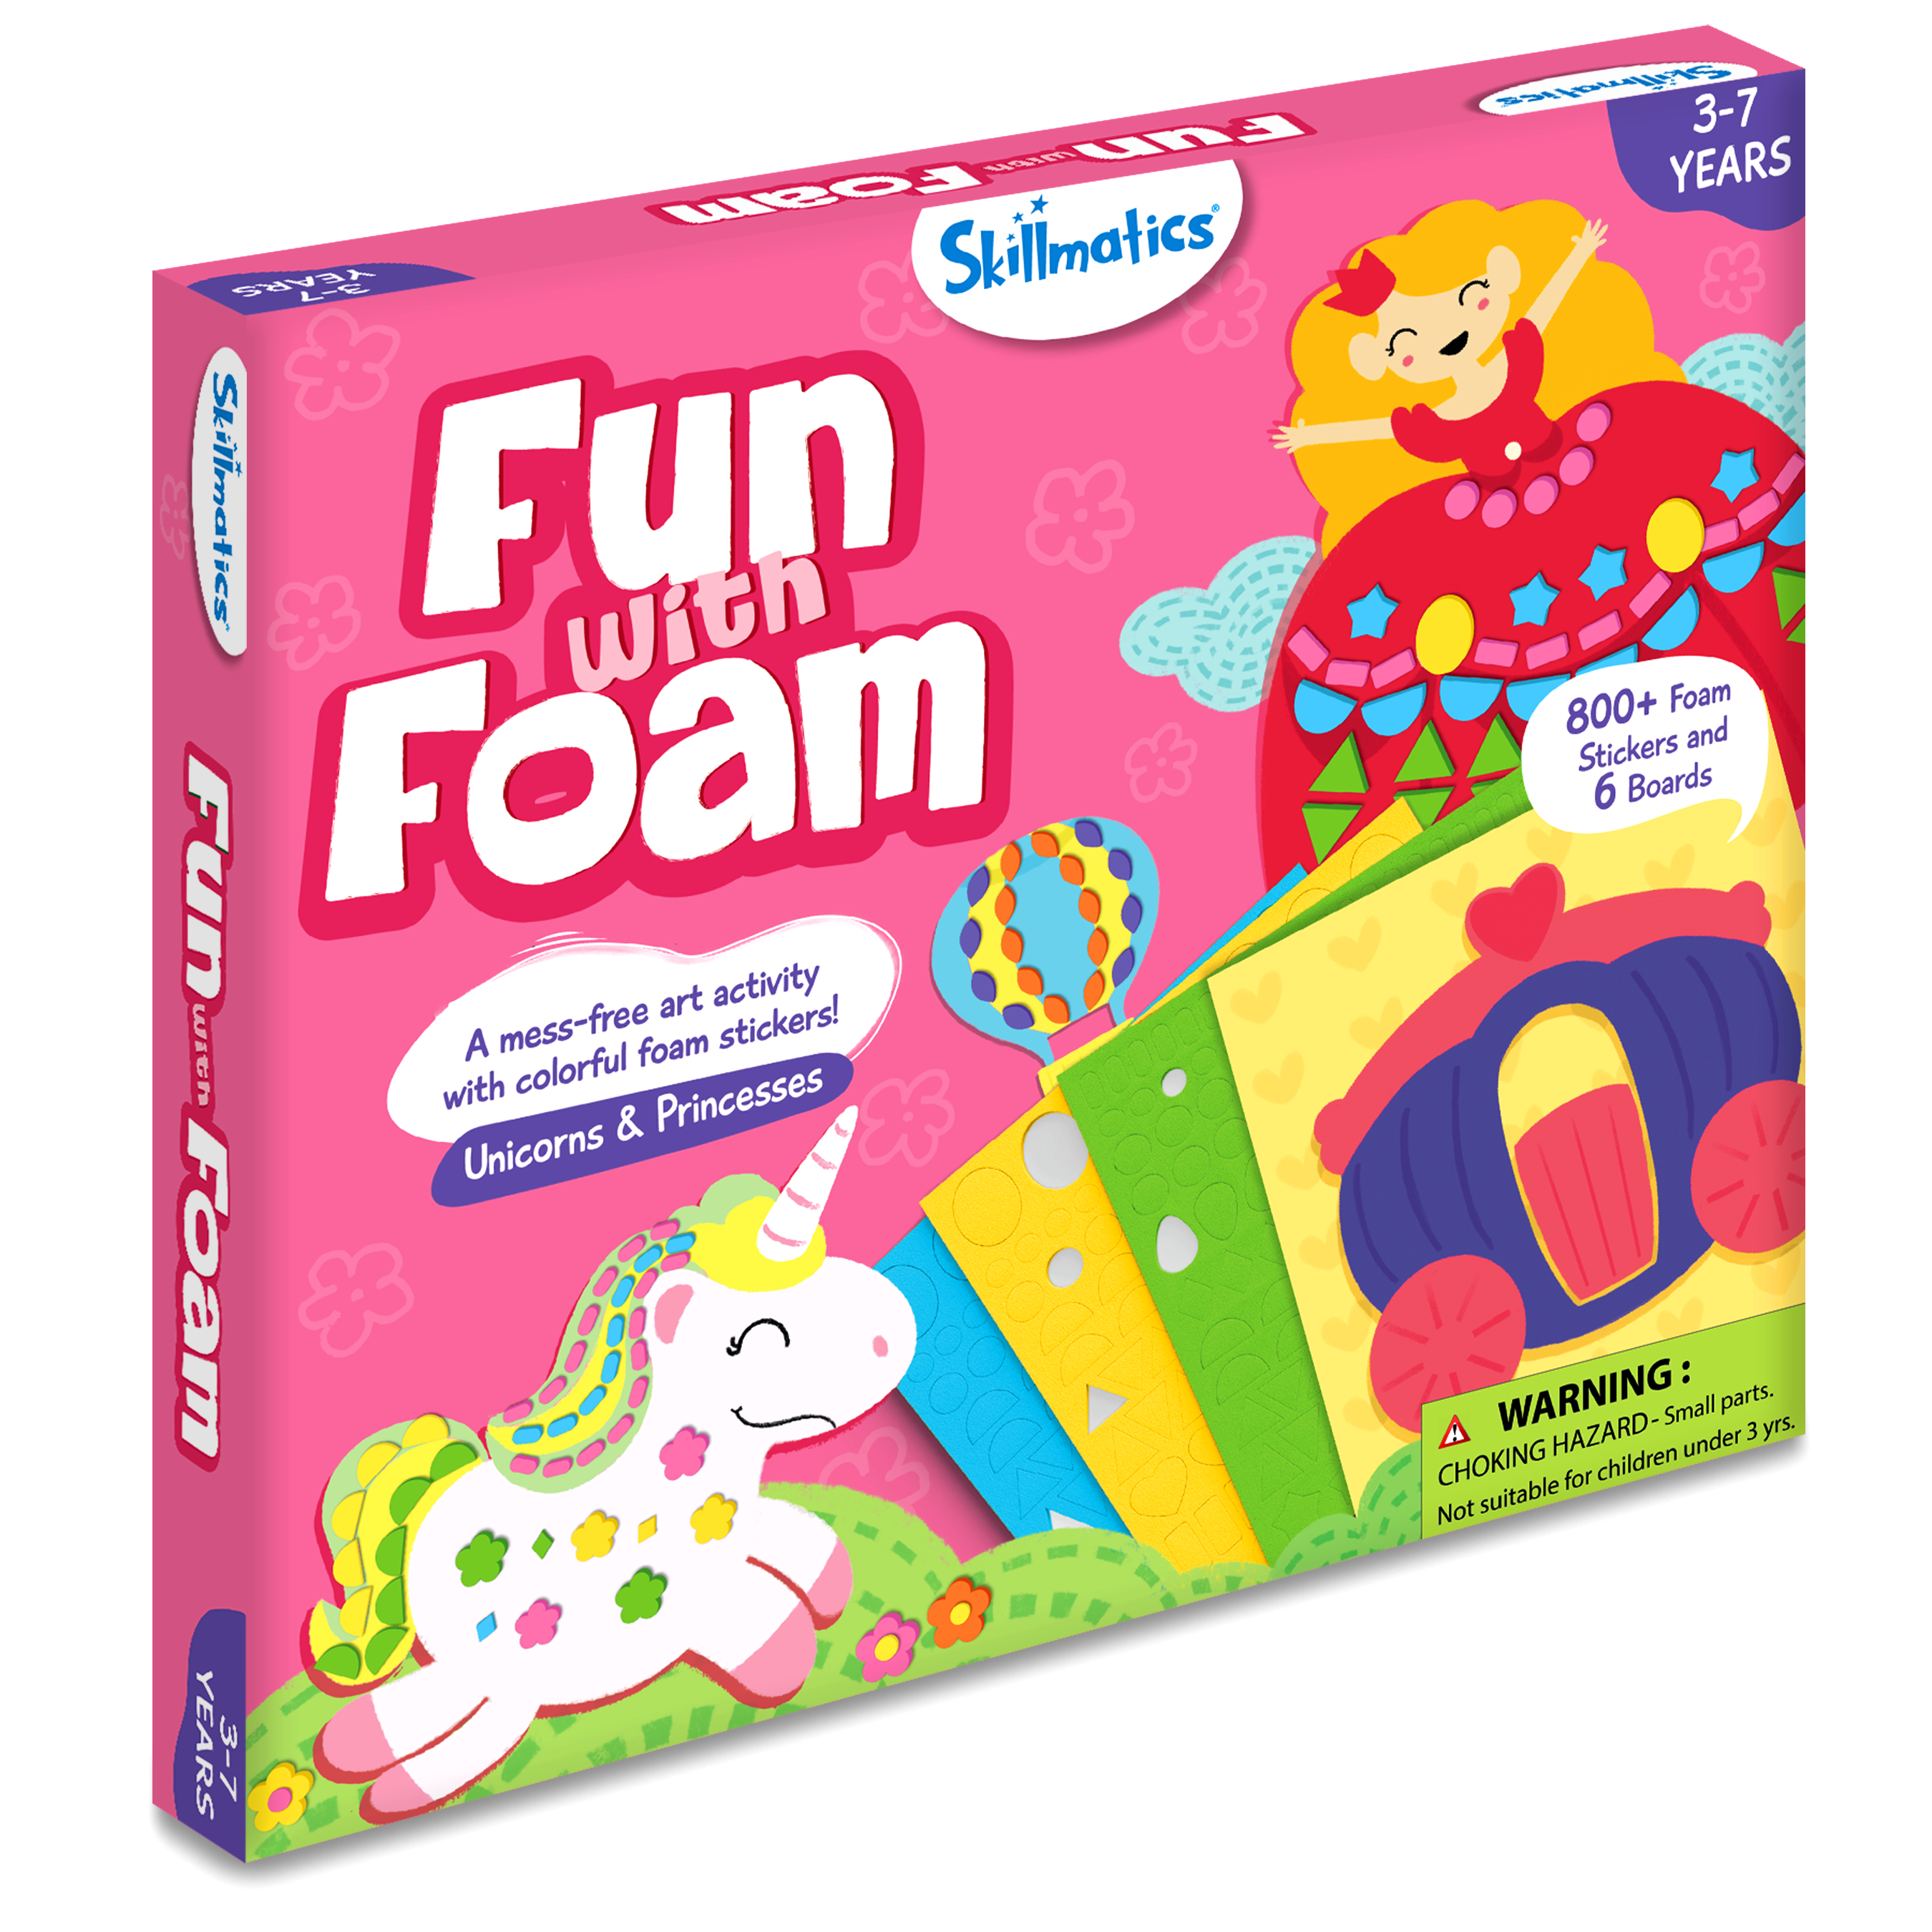 Skillmatics Art Activity - Fun With Foam, No Mess Sticker Art, 6 Unicorn & Princess Themed Pictures, Gifts For Ages 3 To 7